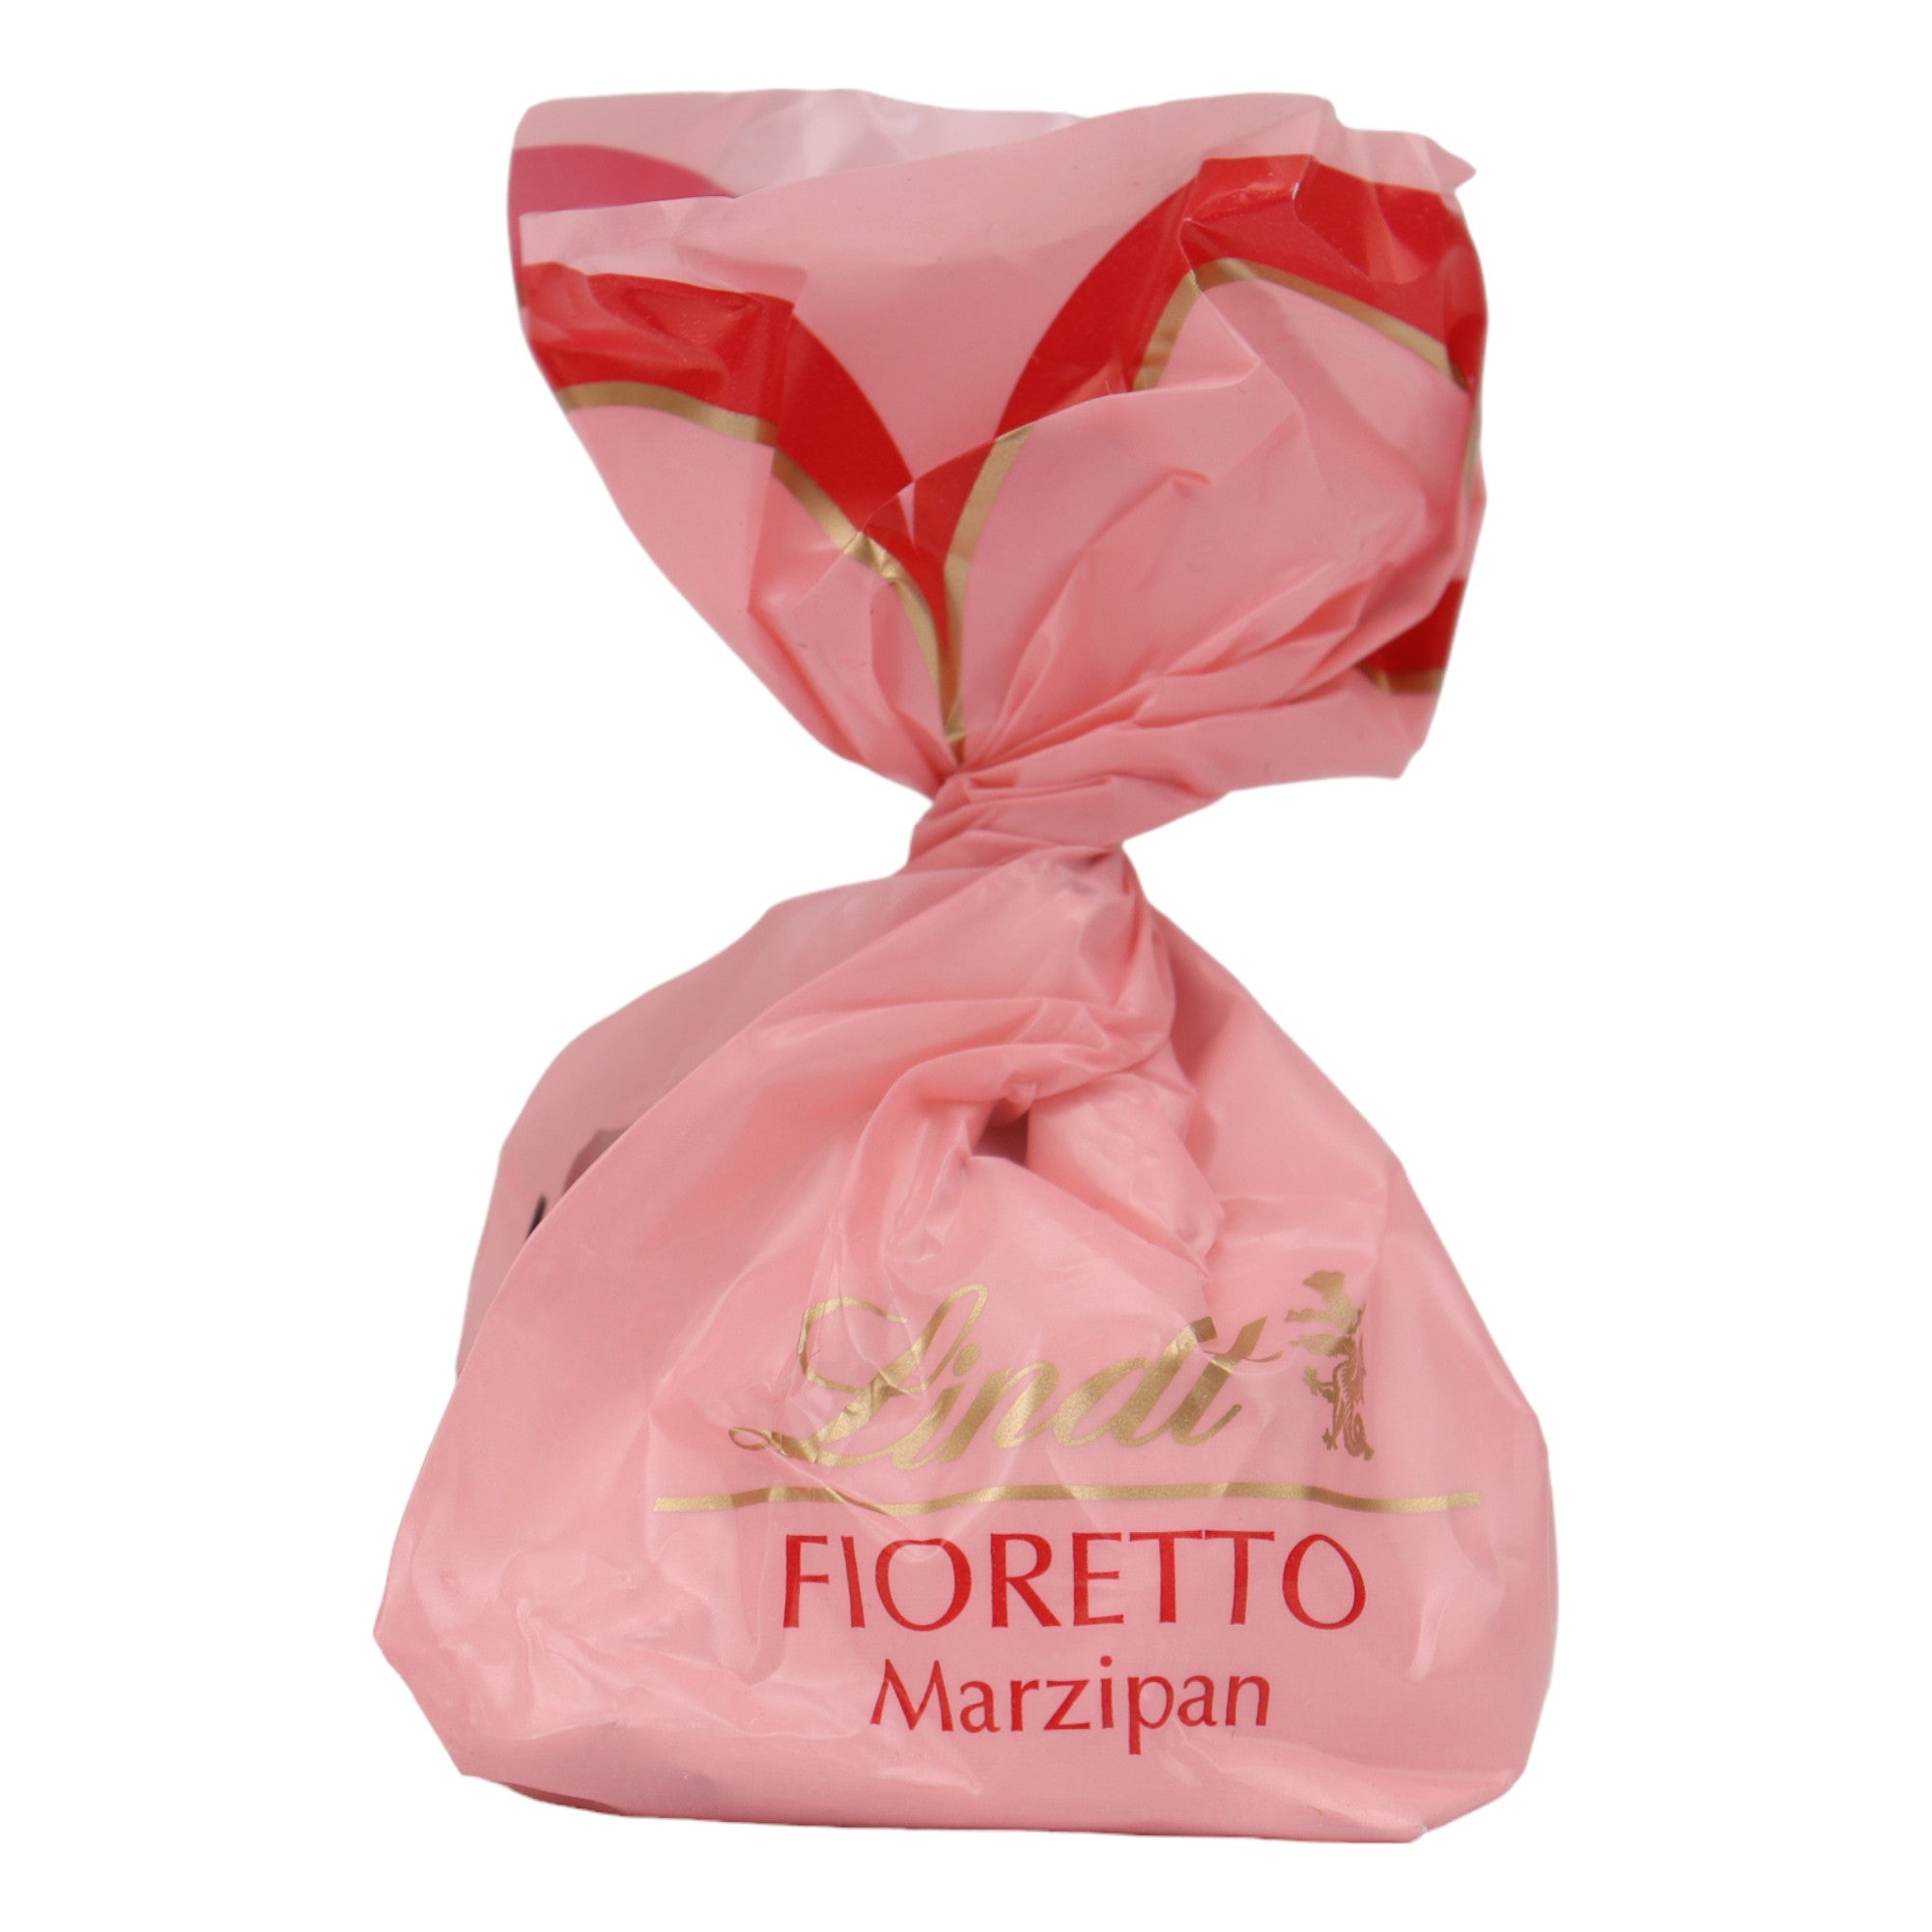 Lindt Fioretto Marzipan groß 23g